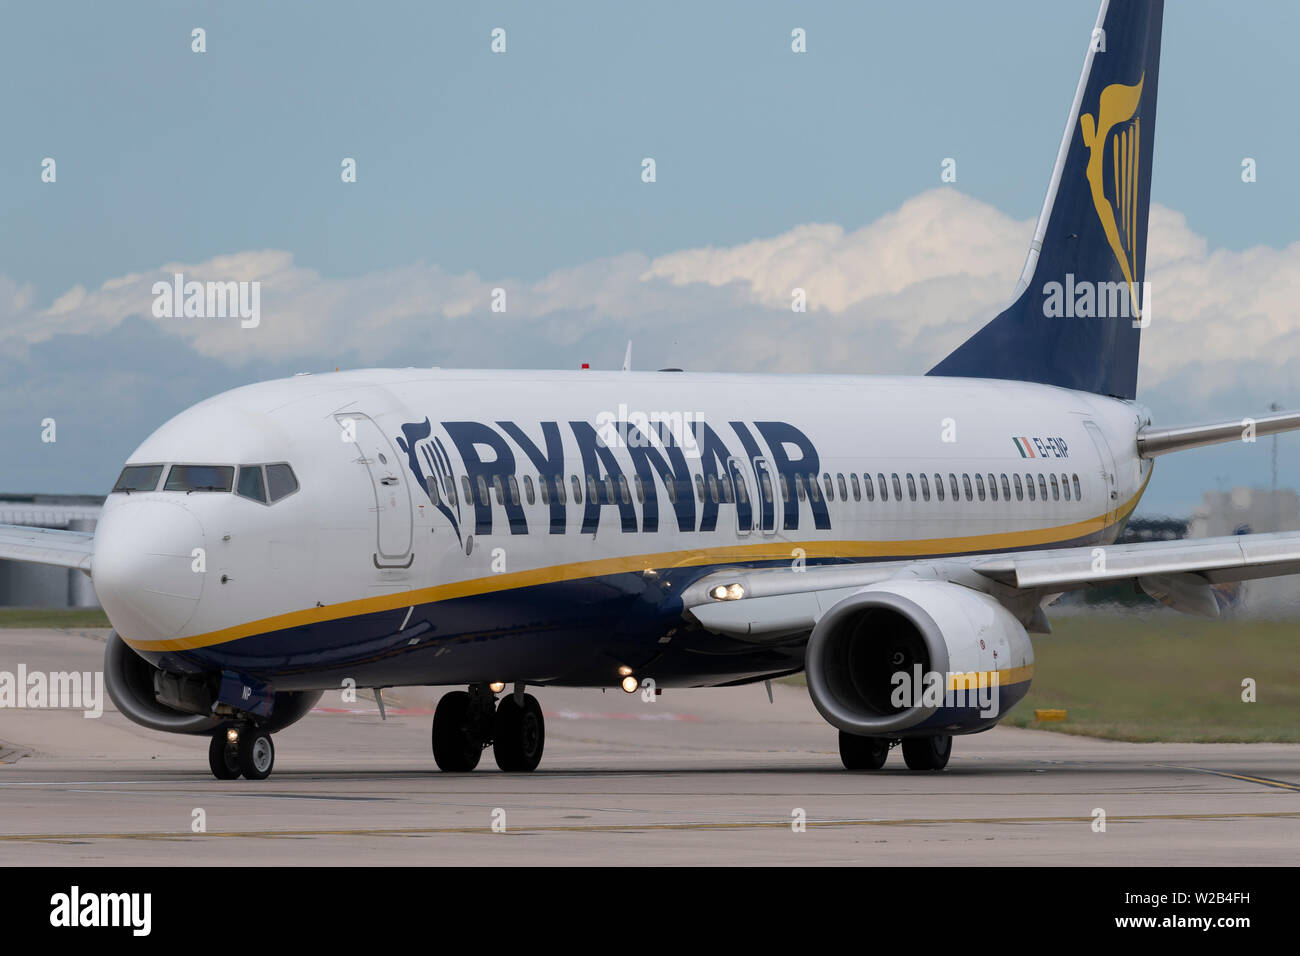 A Ryanair Boeing 737-800 taxis on the runway at Manchester Airport, UK. Stock Photo